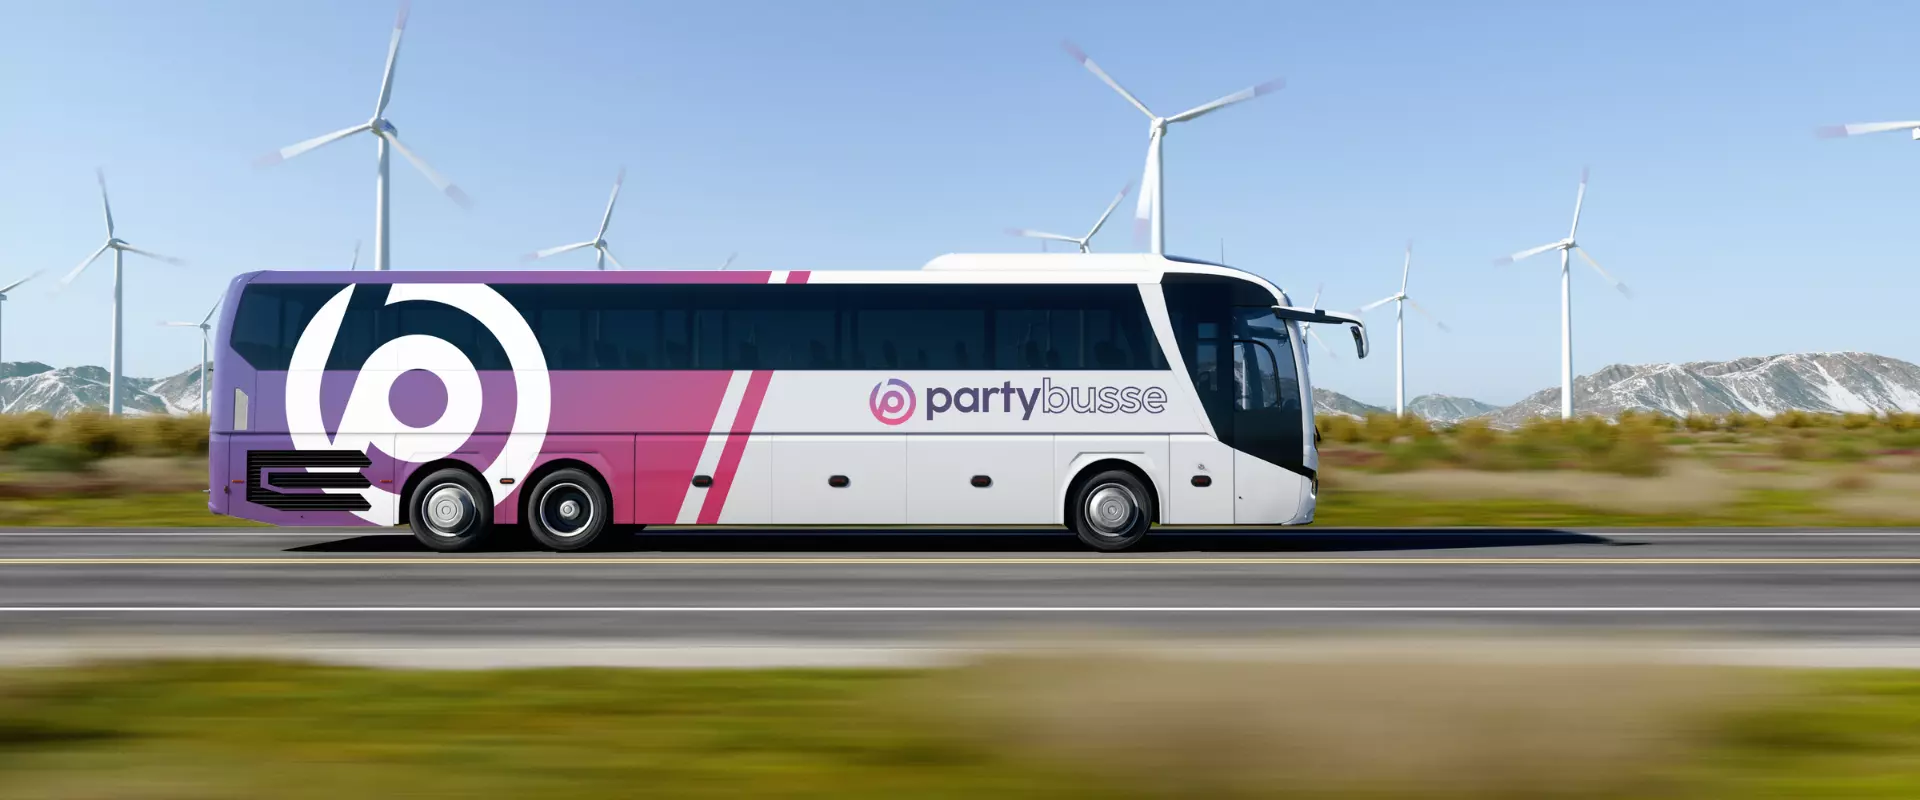 Partybusse - Hilfe Center